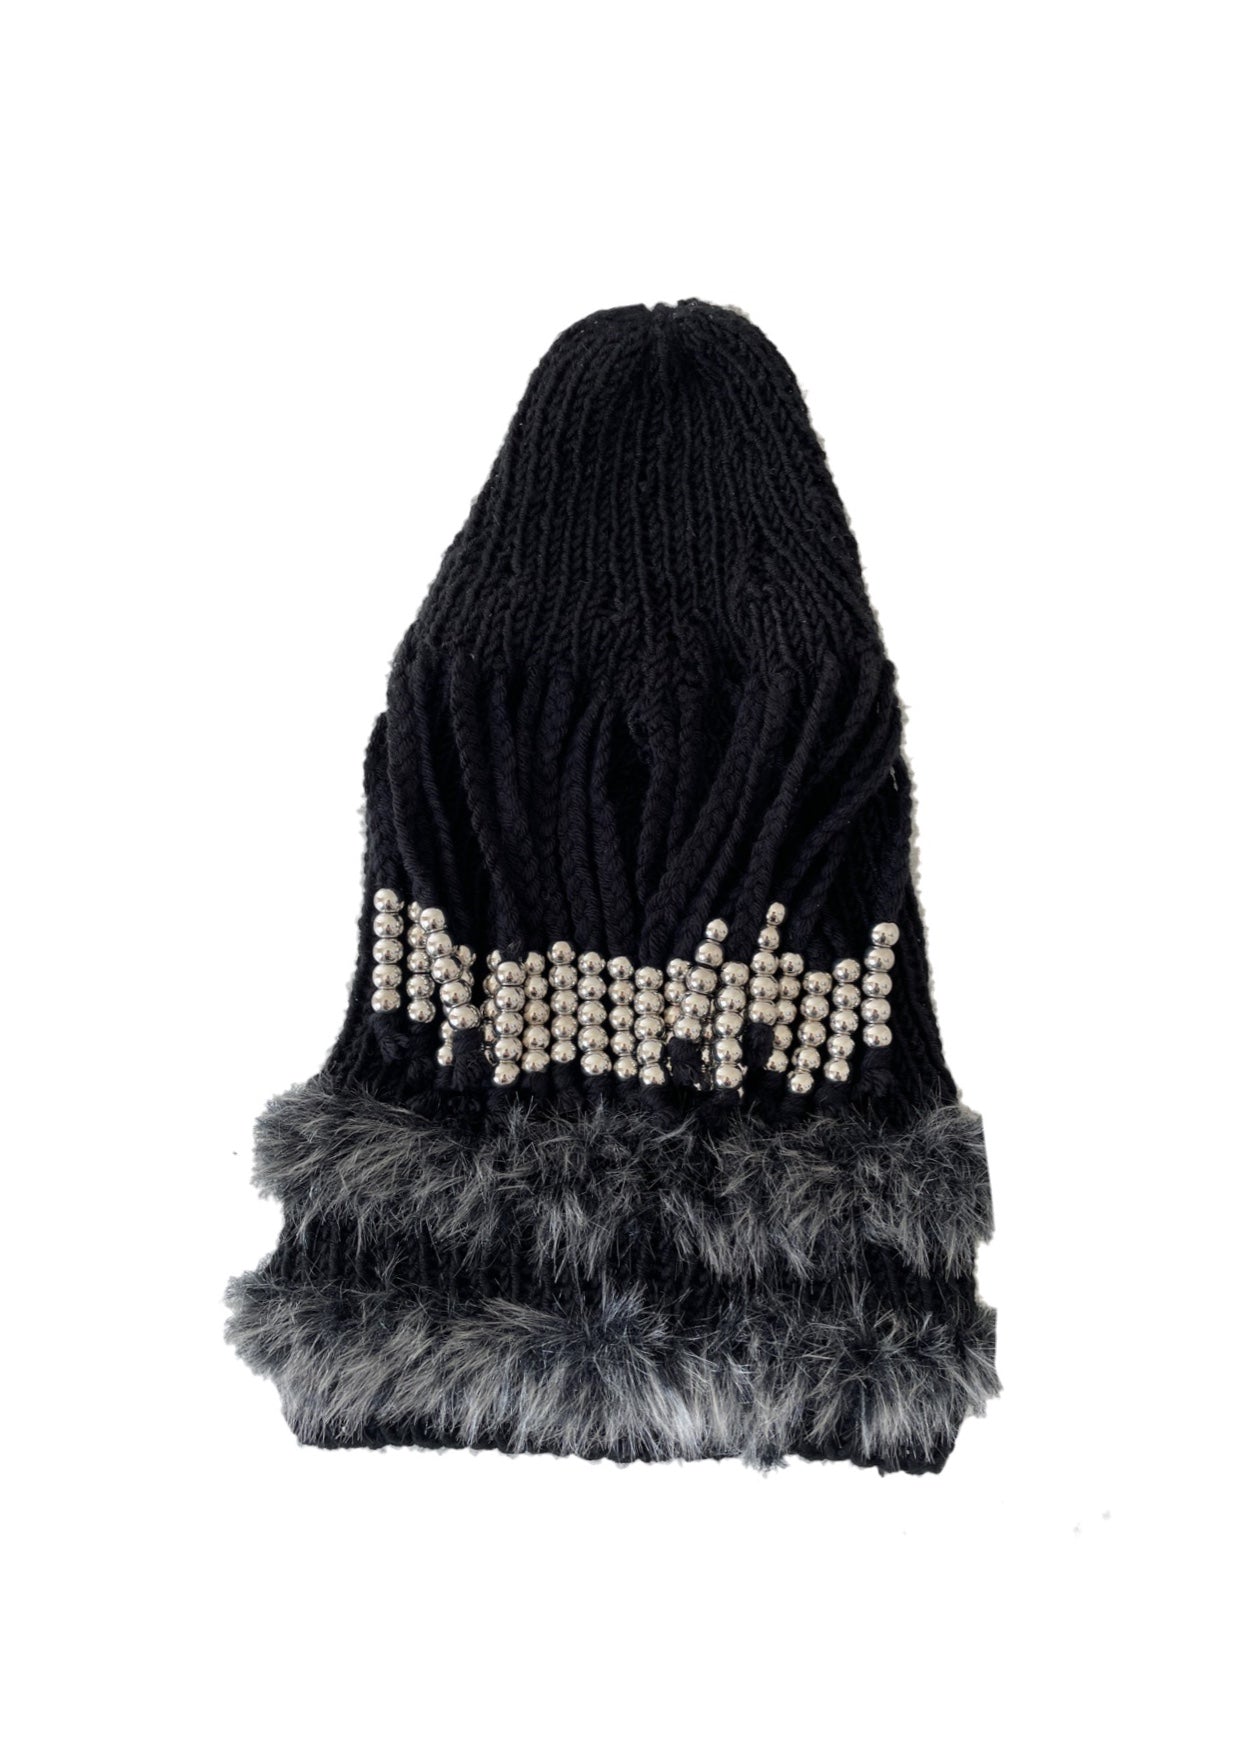 BLACK FUR with Silver Beads